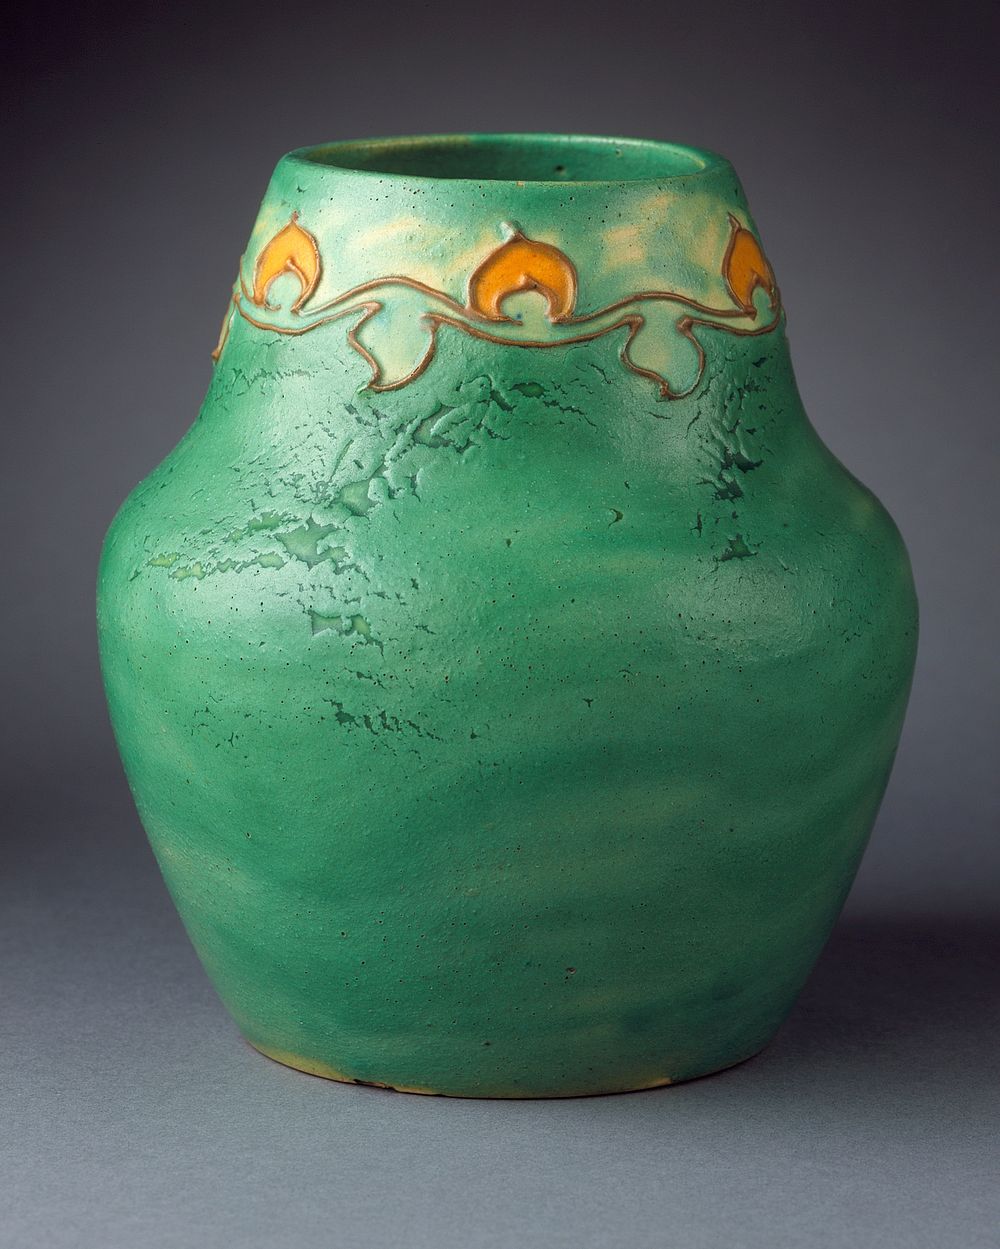 Vase by Frederick Hurten Rhead and Arequipa Pottery